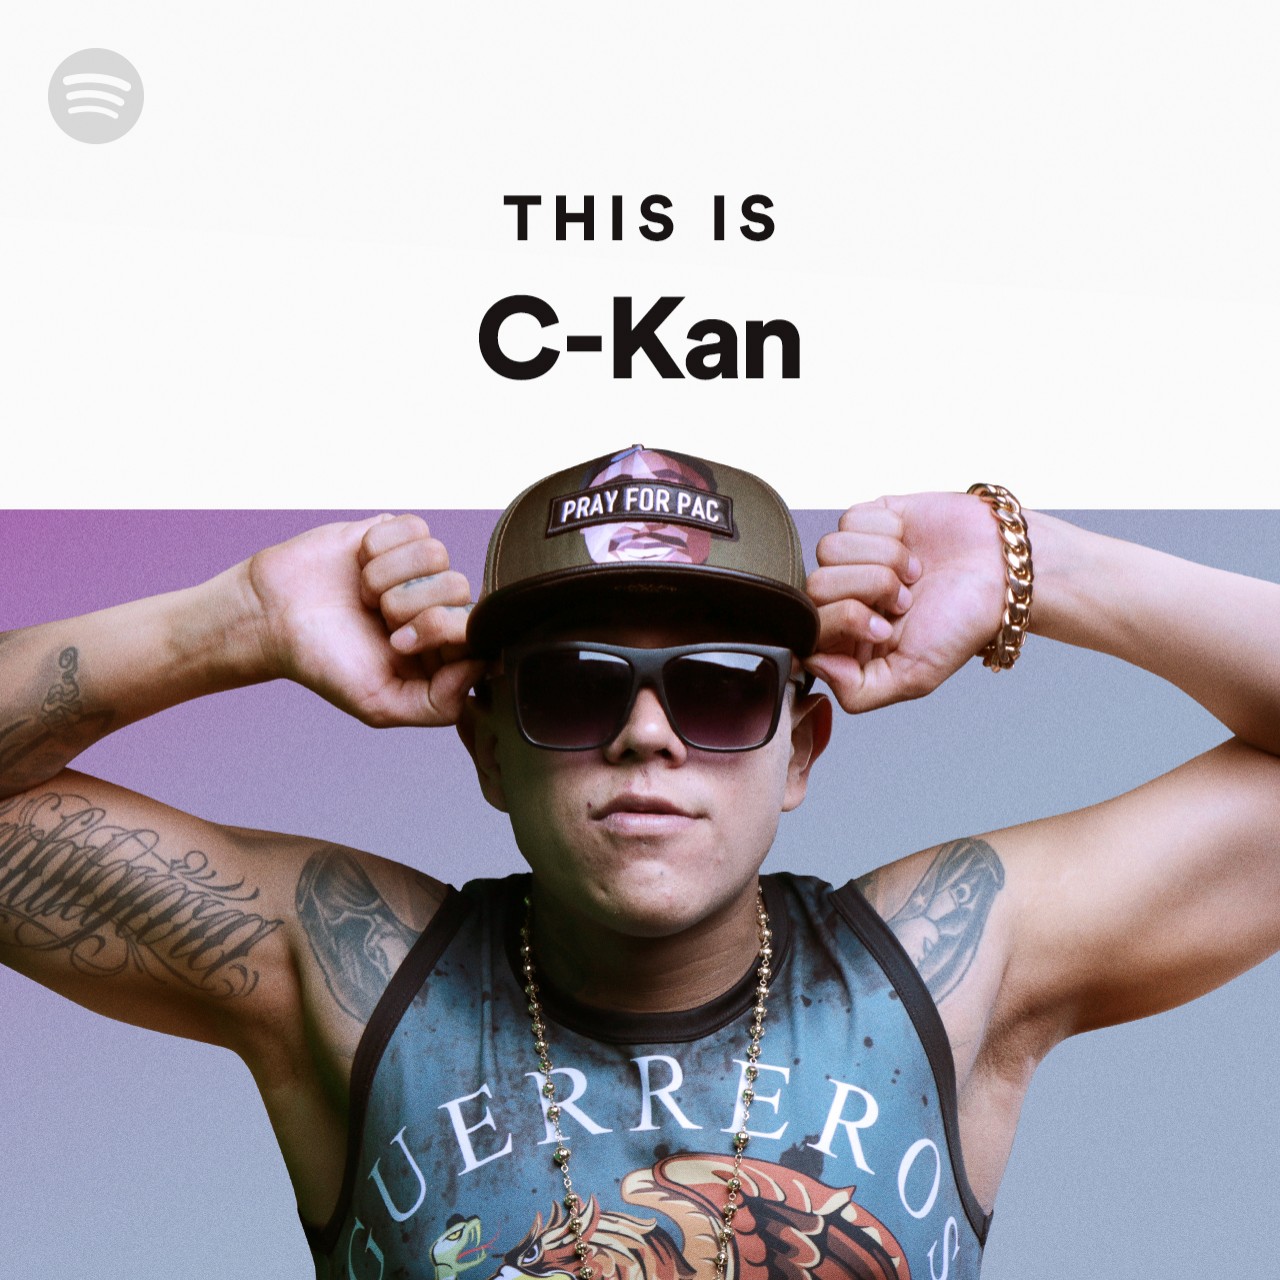 This Is C Kan Spotify Playlist C kan quien contra mi. this is c kan spotify playlist